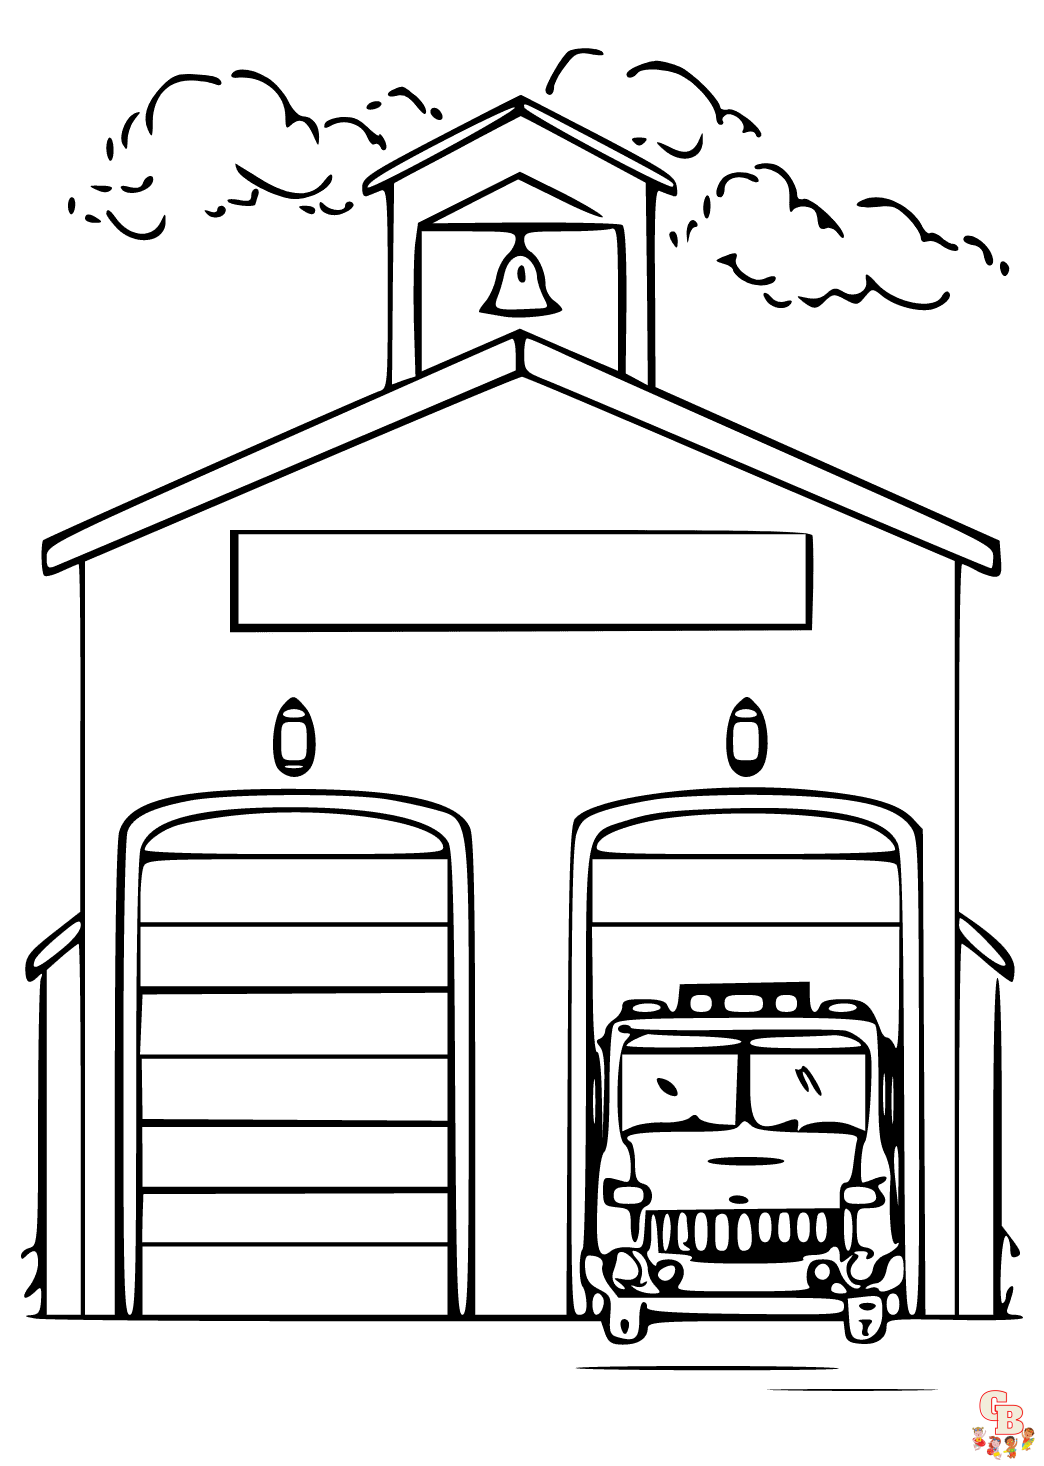 Printable Fire station coloring sheets